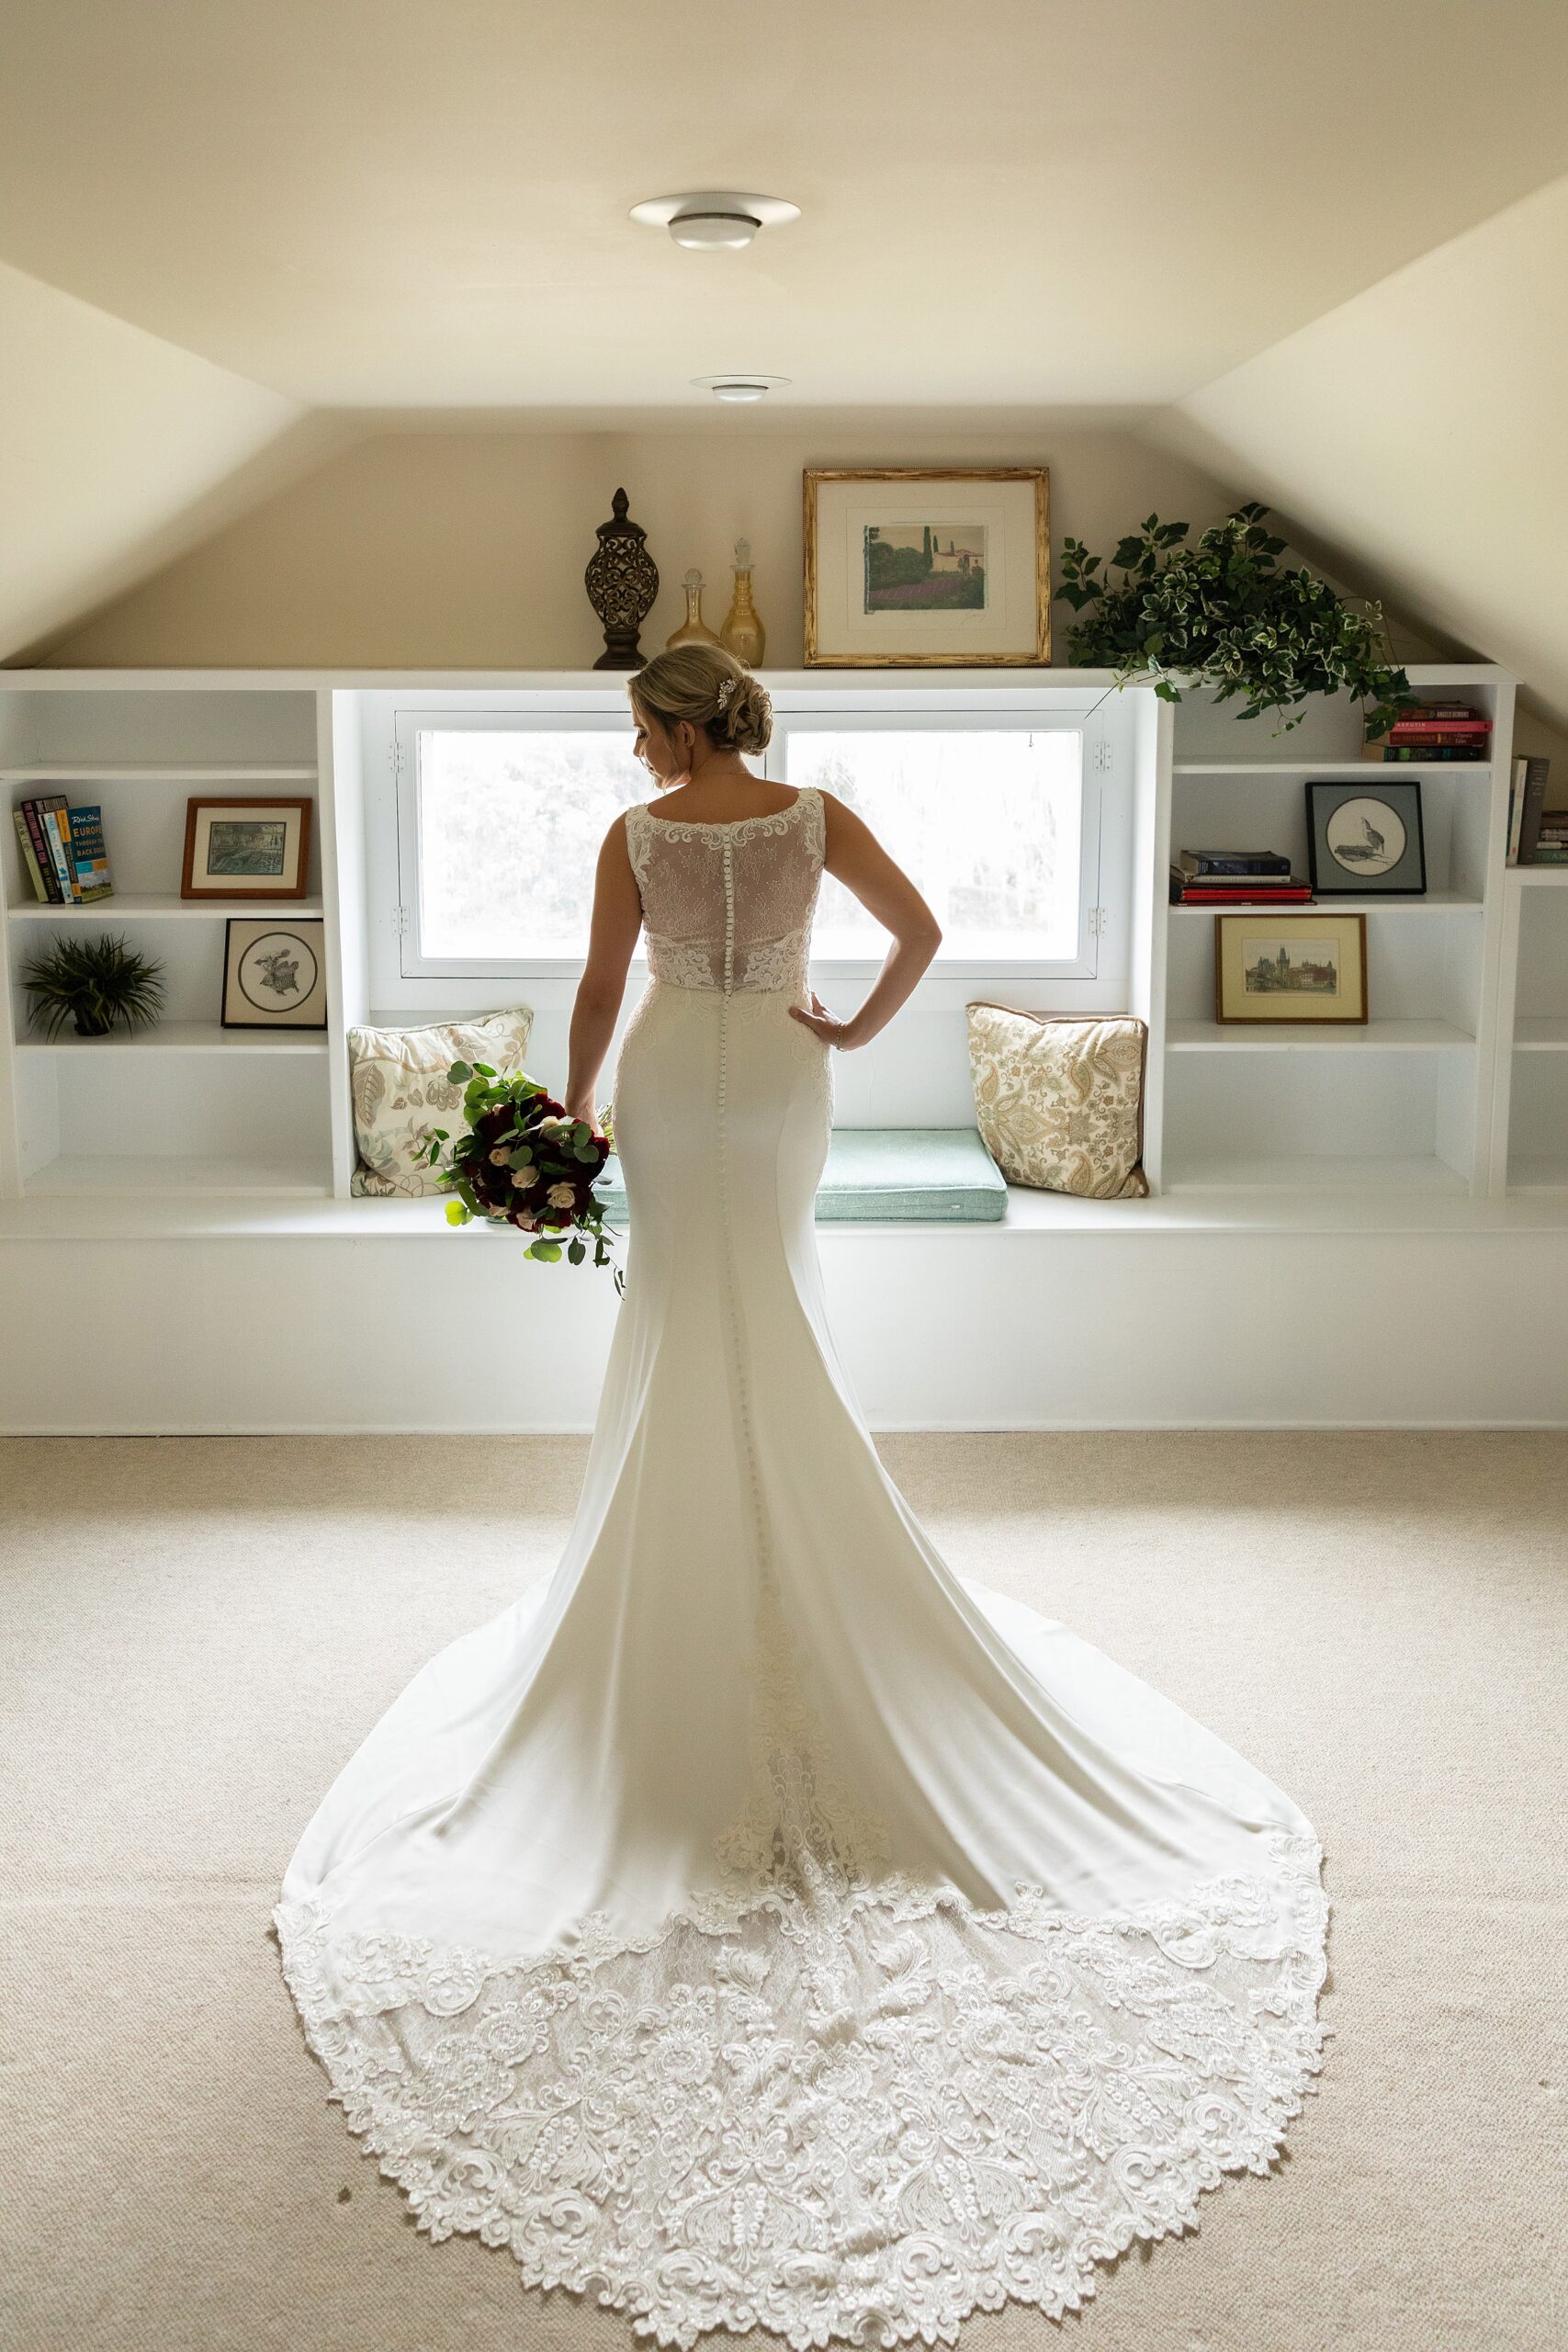 A bride stands in a window showing off her long train and bouquet